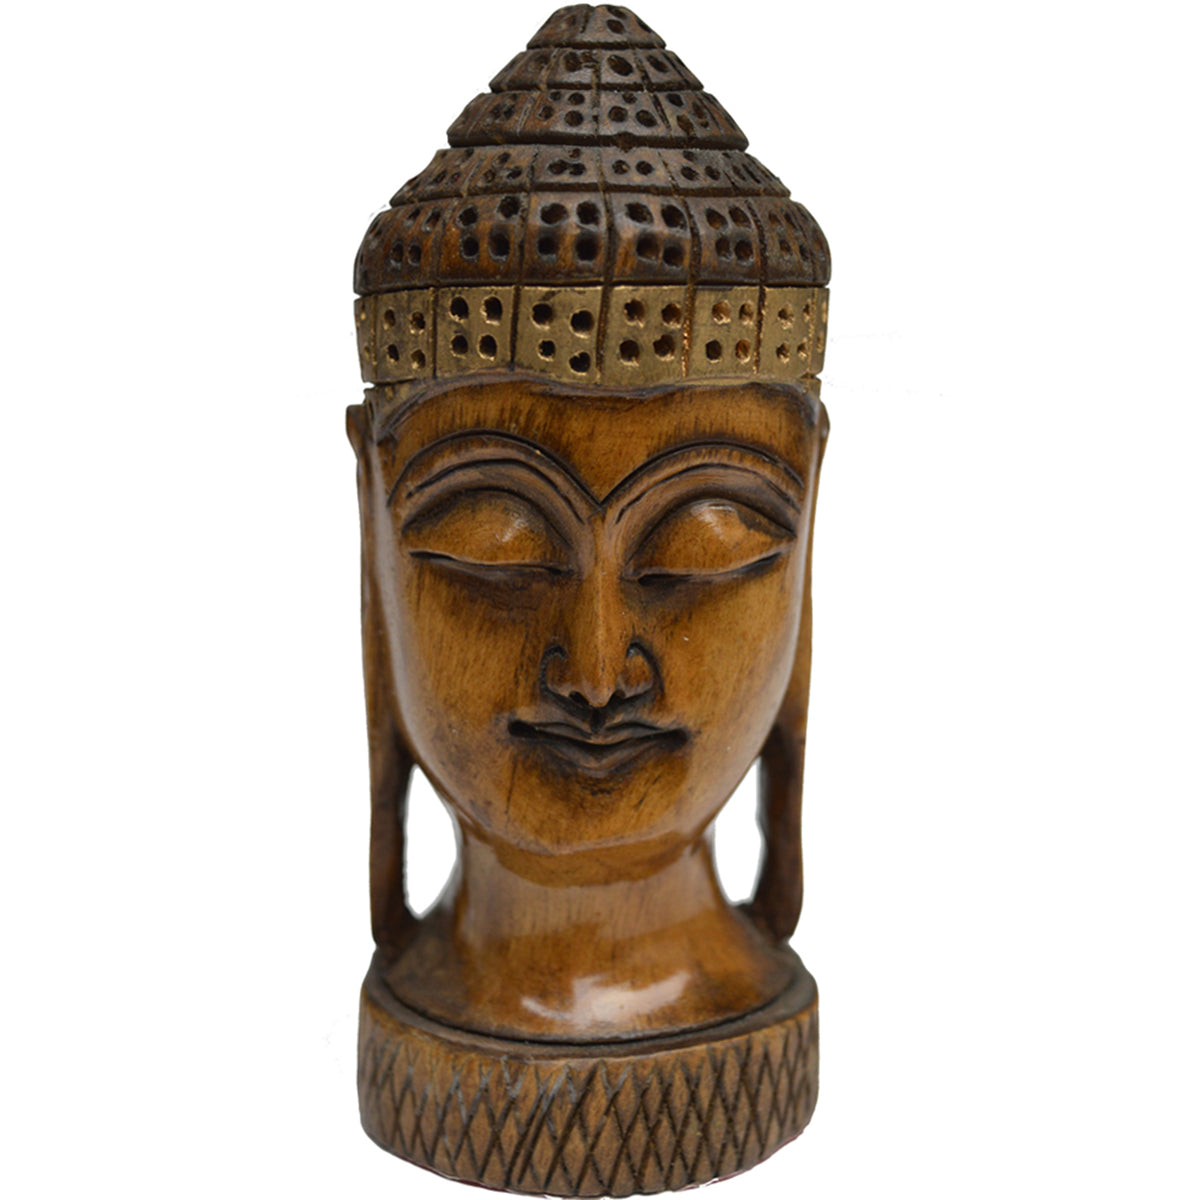 Wholesale Wooden Meditative Buddha Head Figure For Perfect Gift